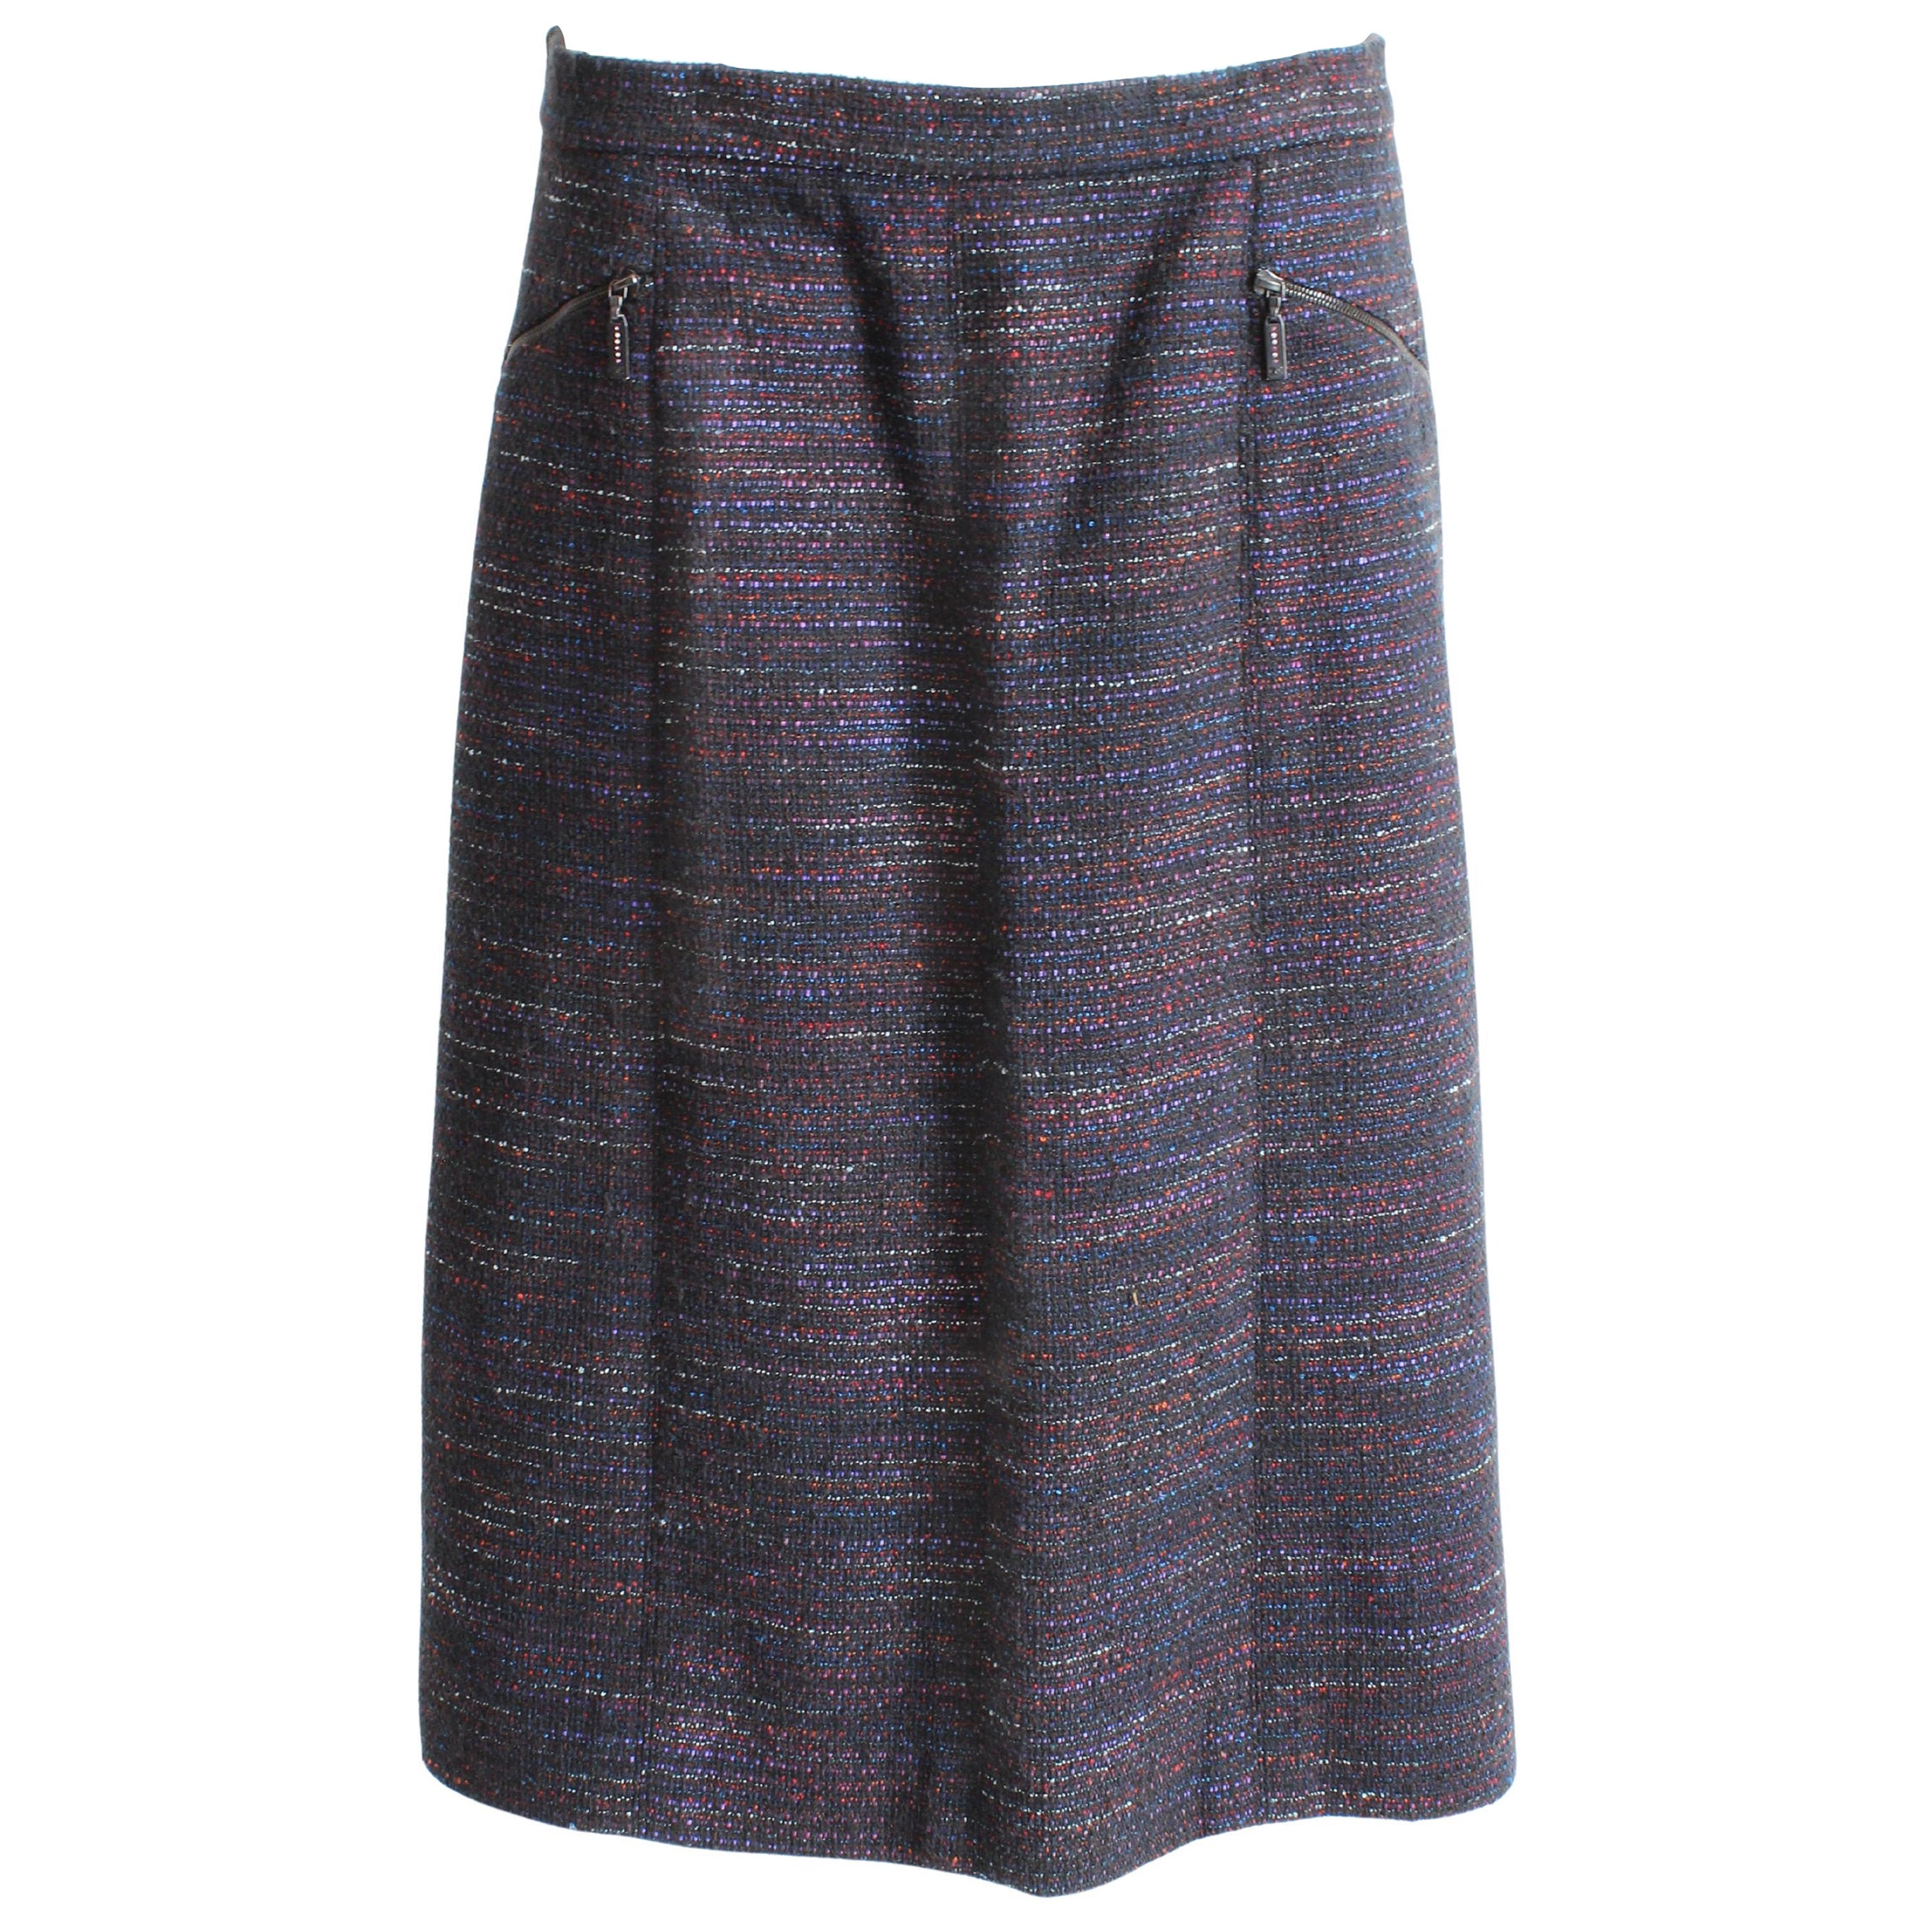 Chanel Skirt Multicolor Cotton Blend Tweed Pencil Style 02A Collection Size 40 For Sale